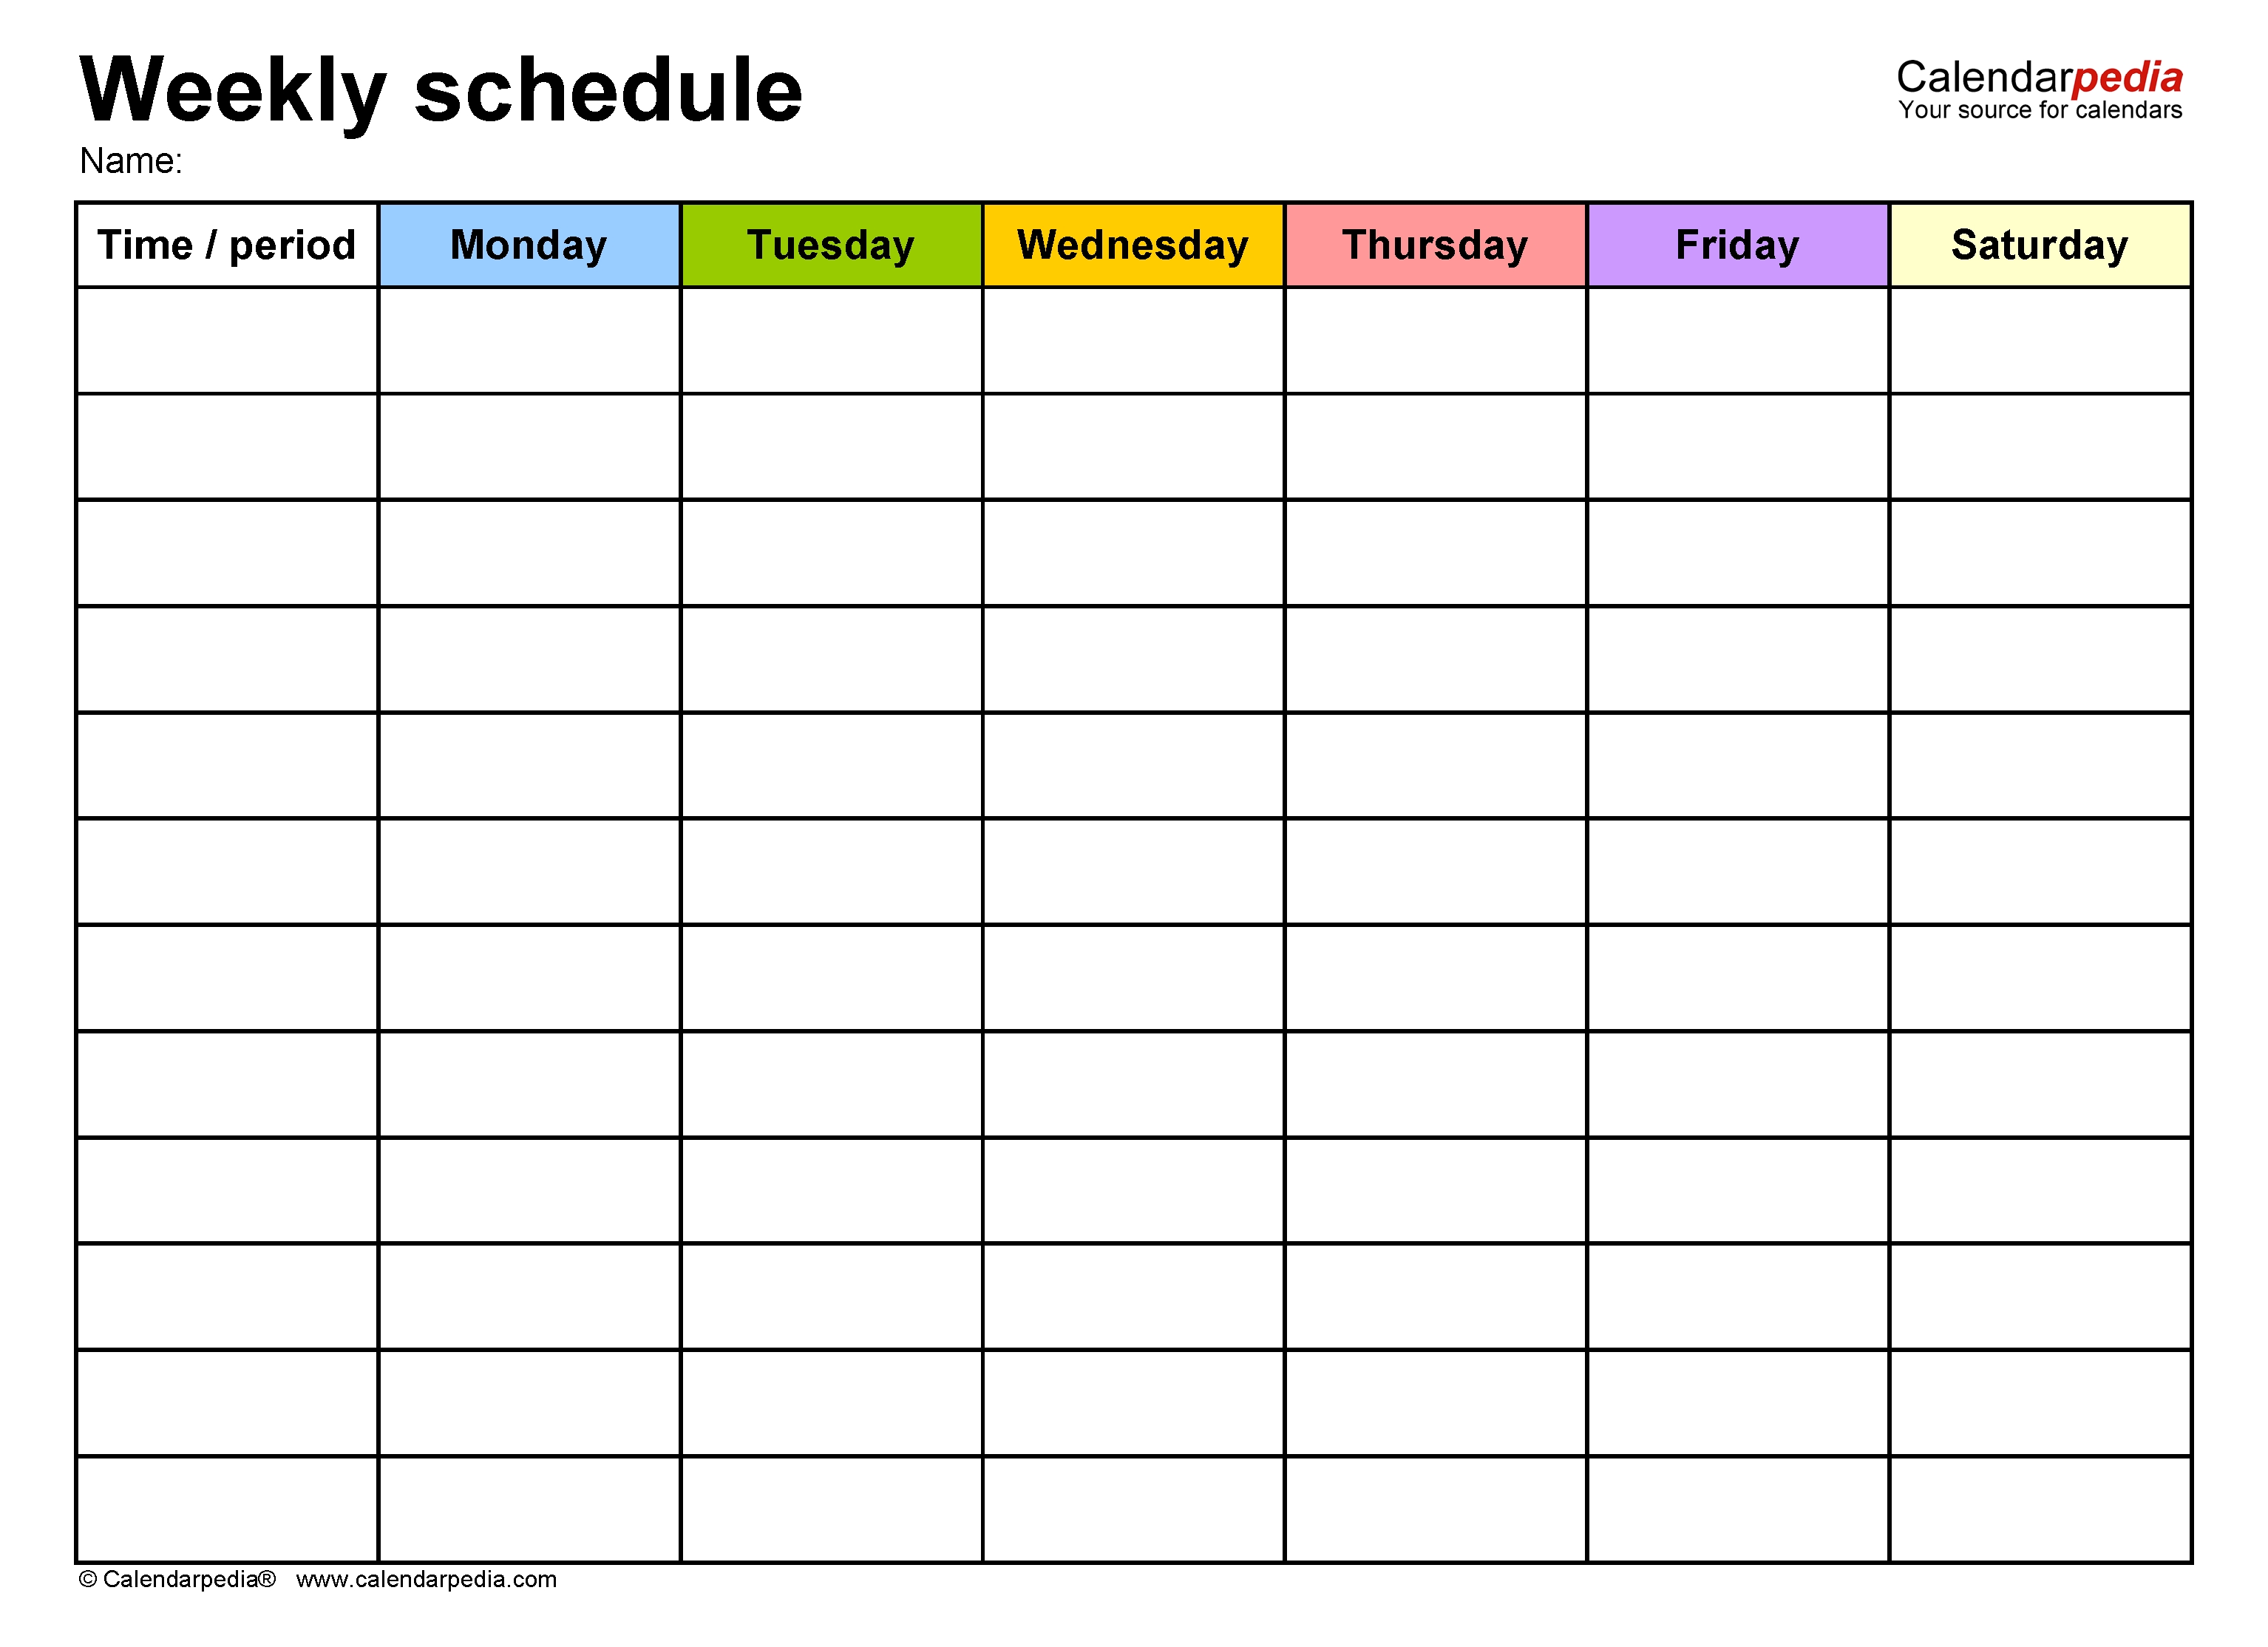 Free Weekly Schedule Templates For Word - 18 Templates within One Week Calendar With Hours